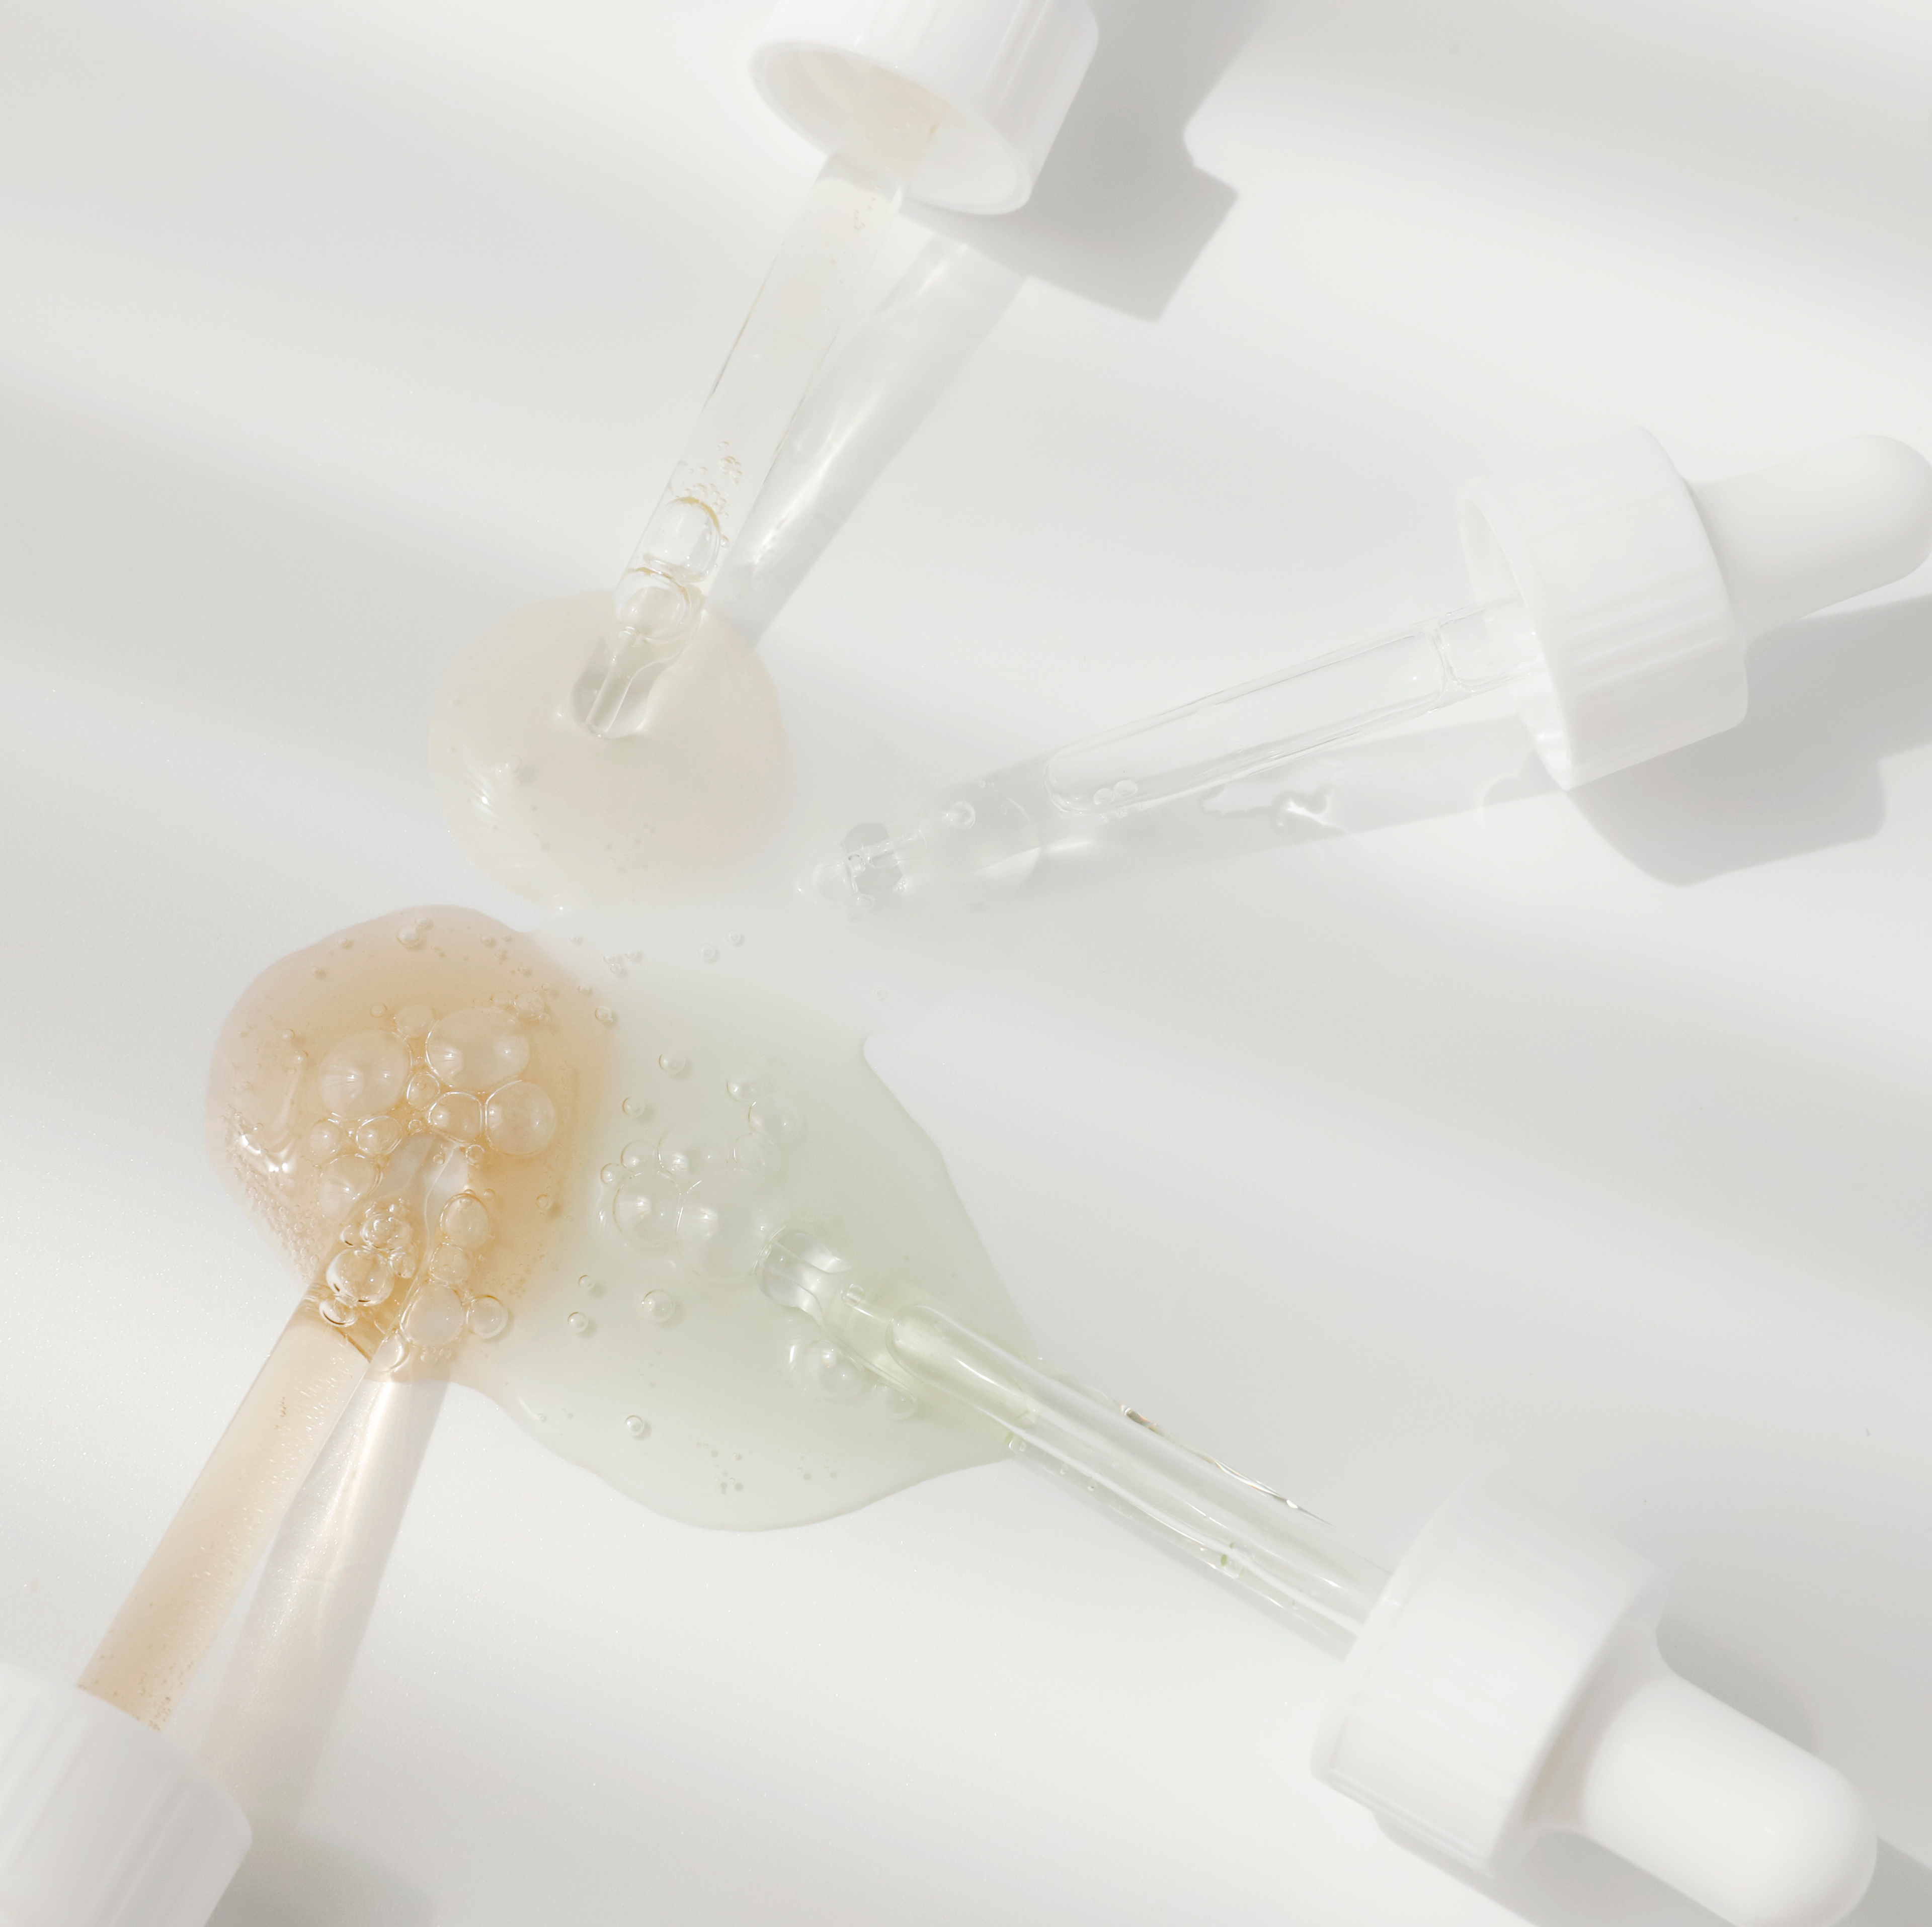 AMPOULES & SERUMS